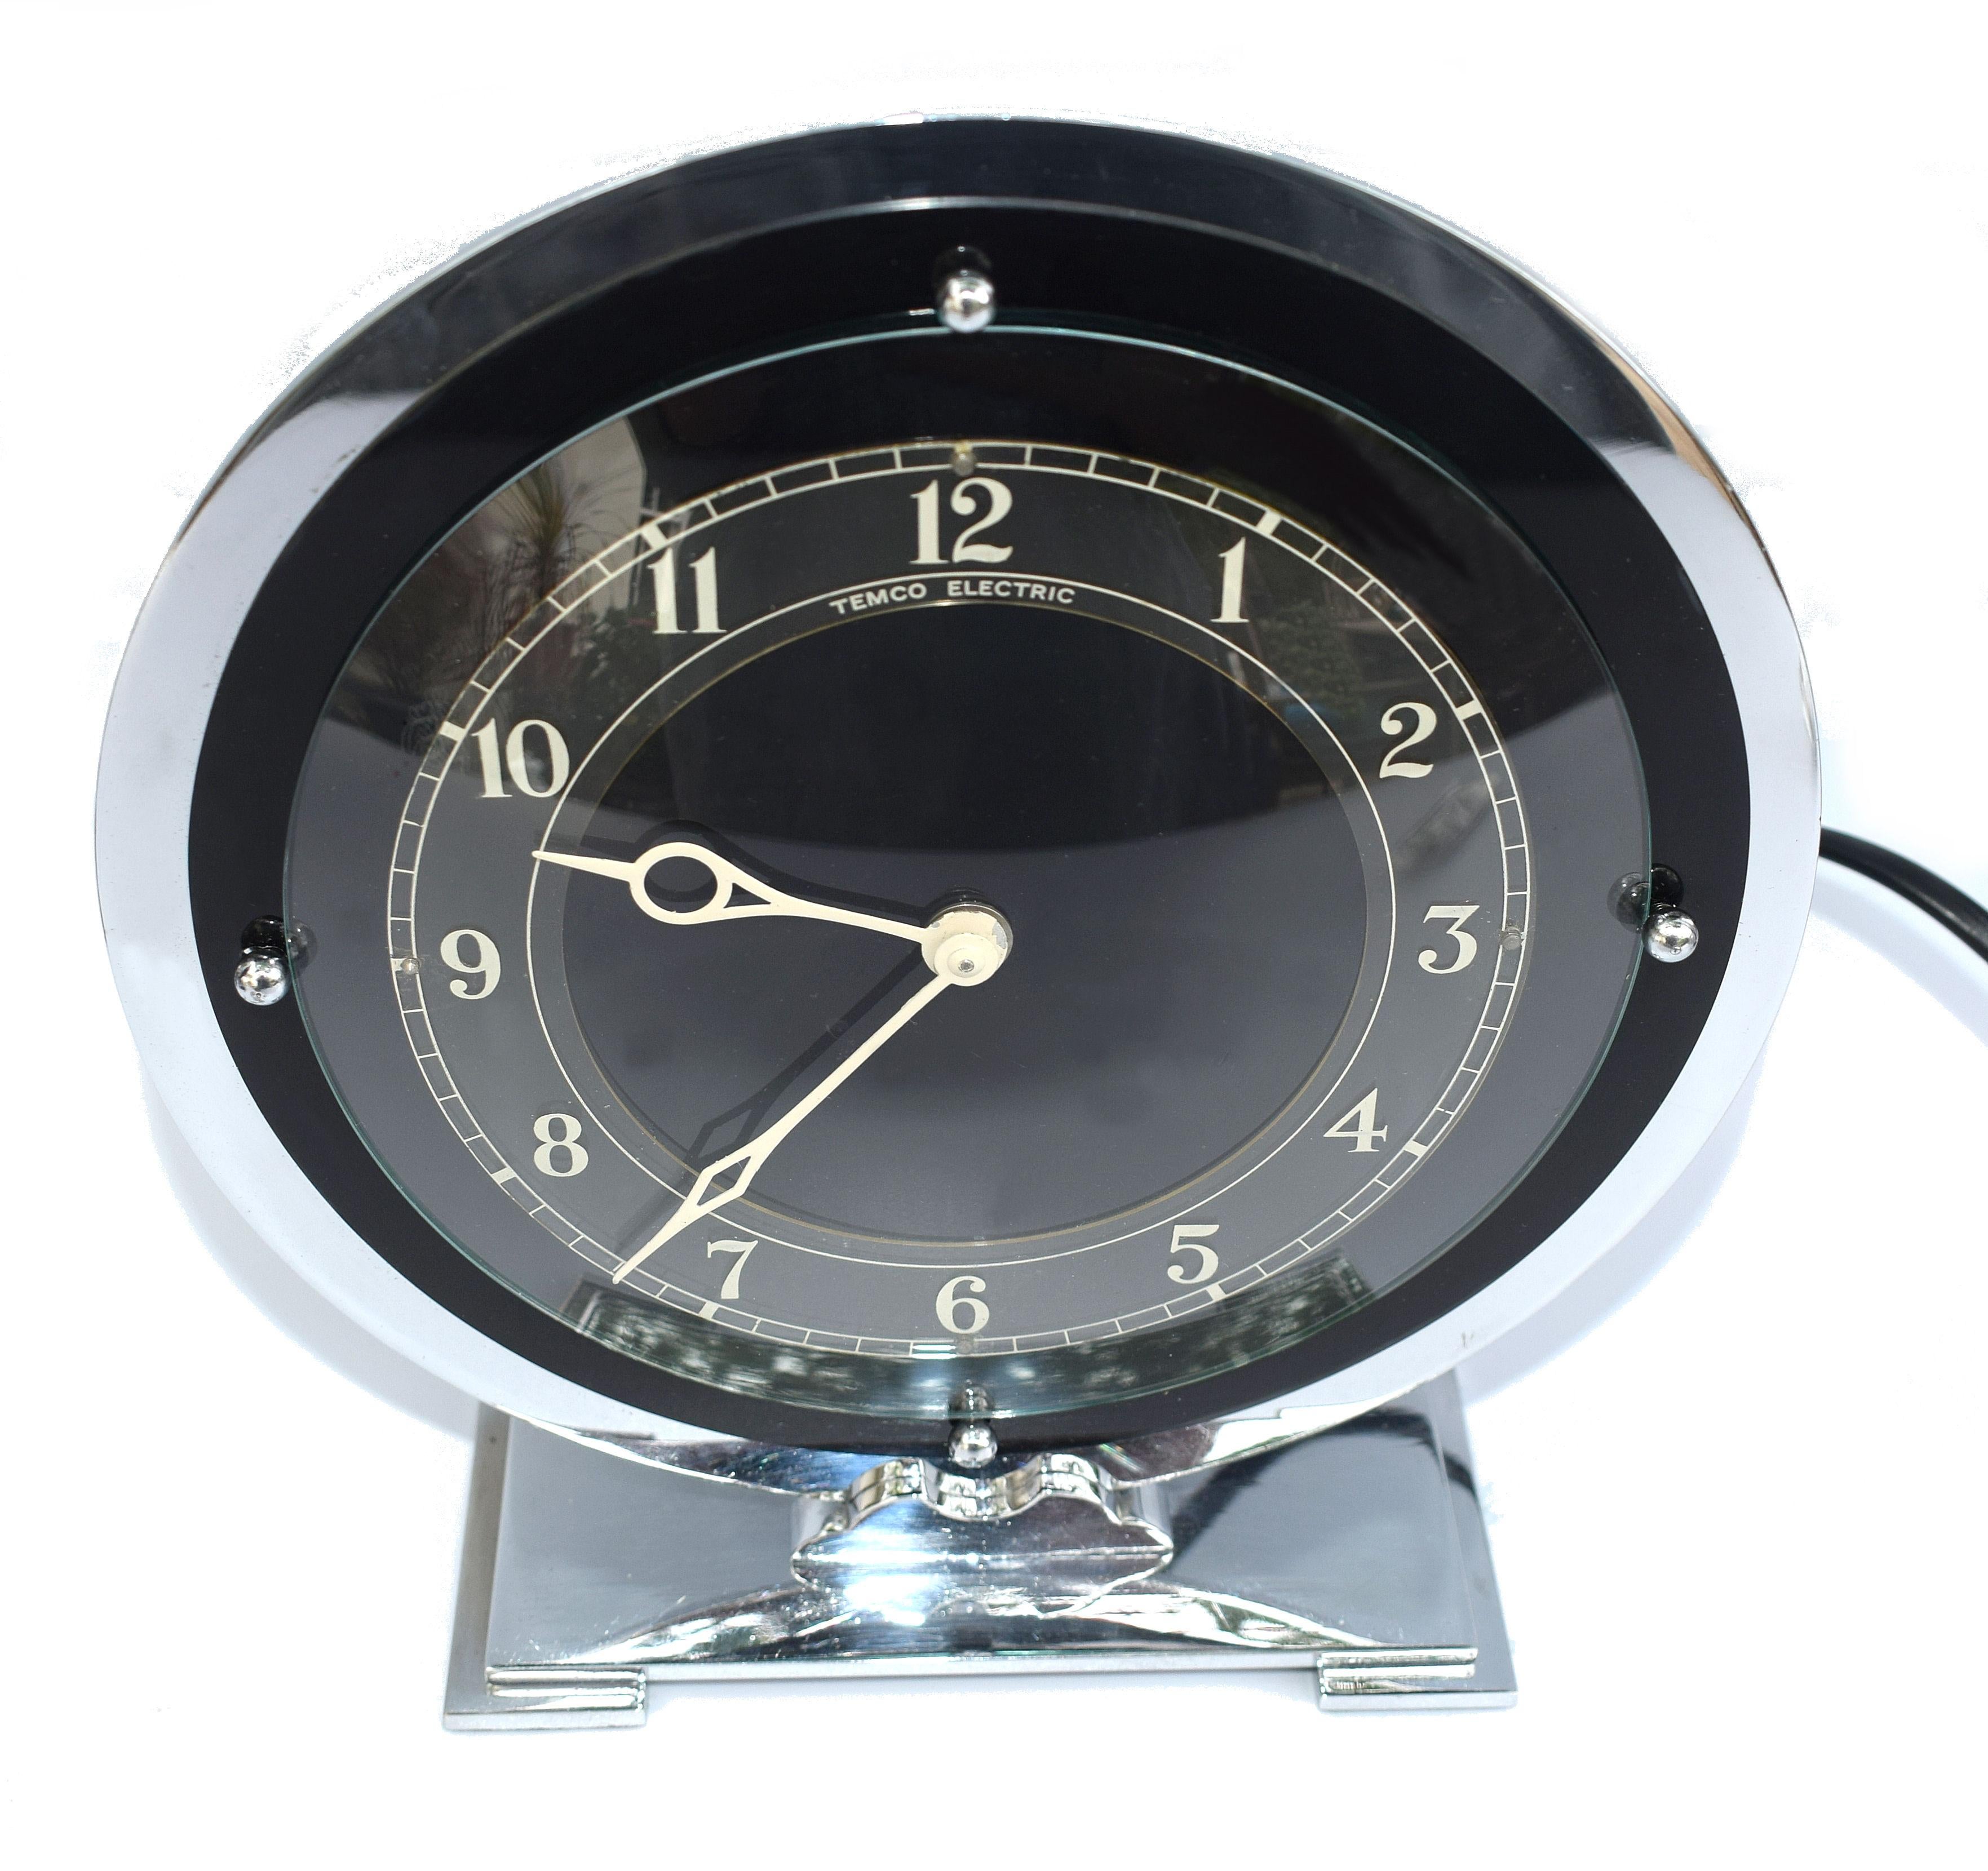 Art Deco modernist clock by Temco an English company. This clock has been fully serviced and works perfectly, it runs on 200/250volt Mains Electric so there's no winding up to do. Ideal for office perhaps or man caves? Condition is excellent. The